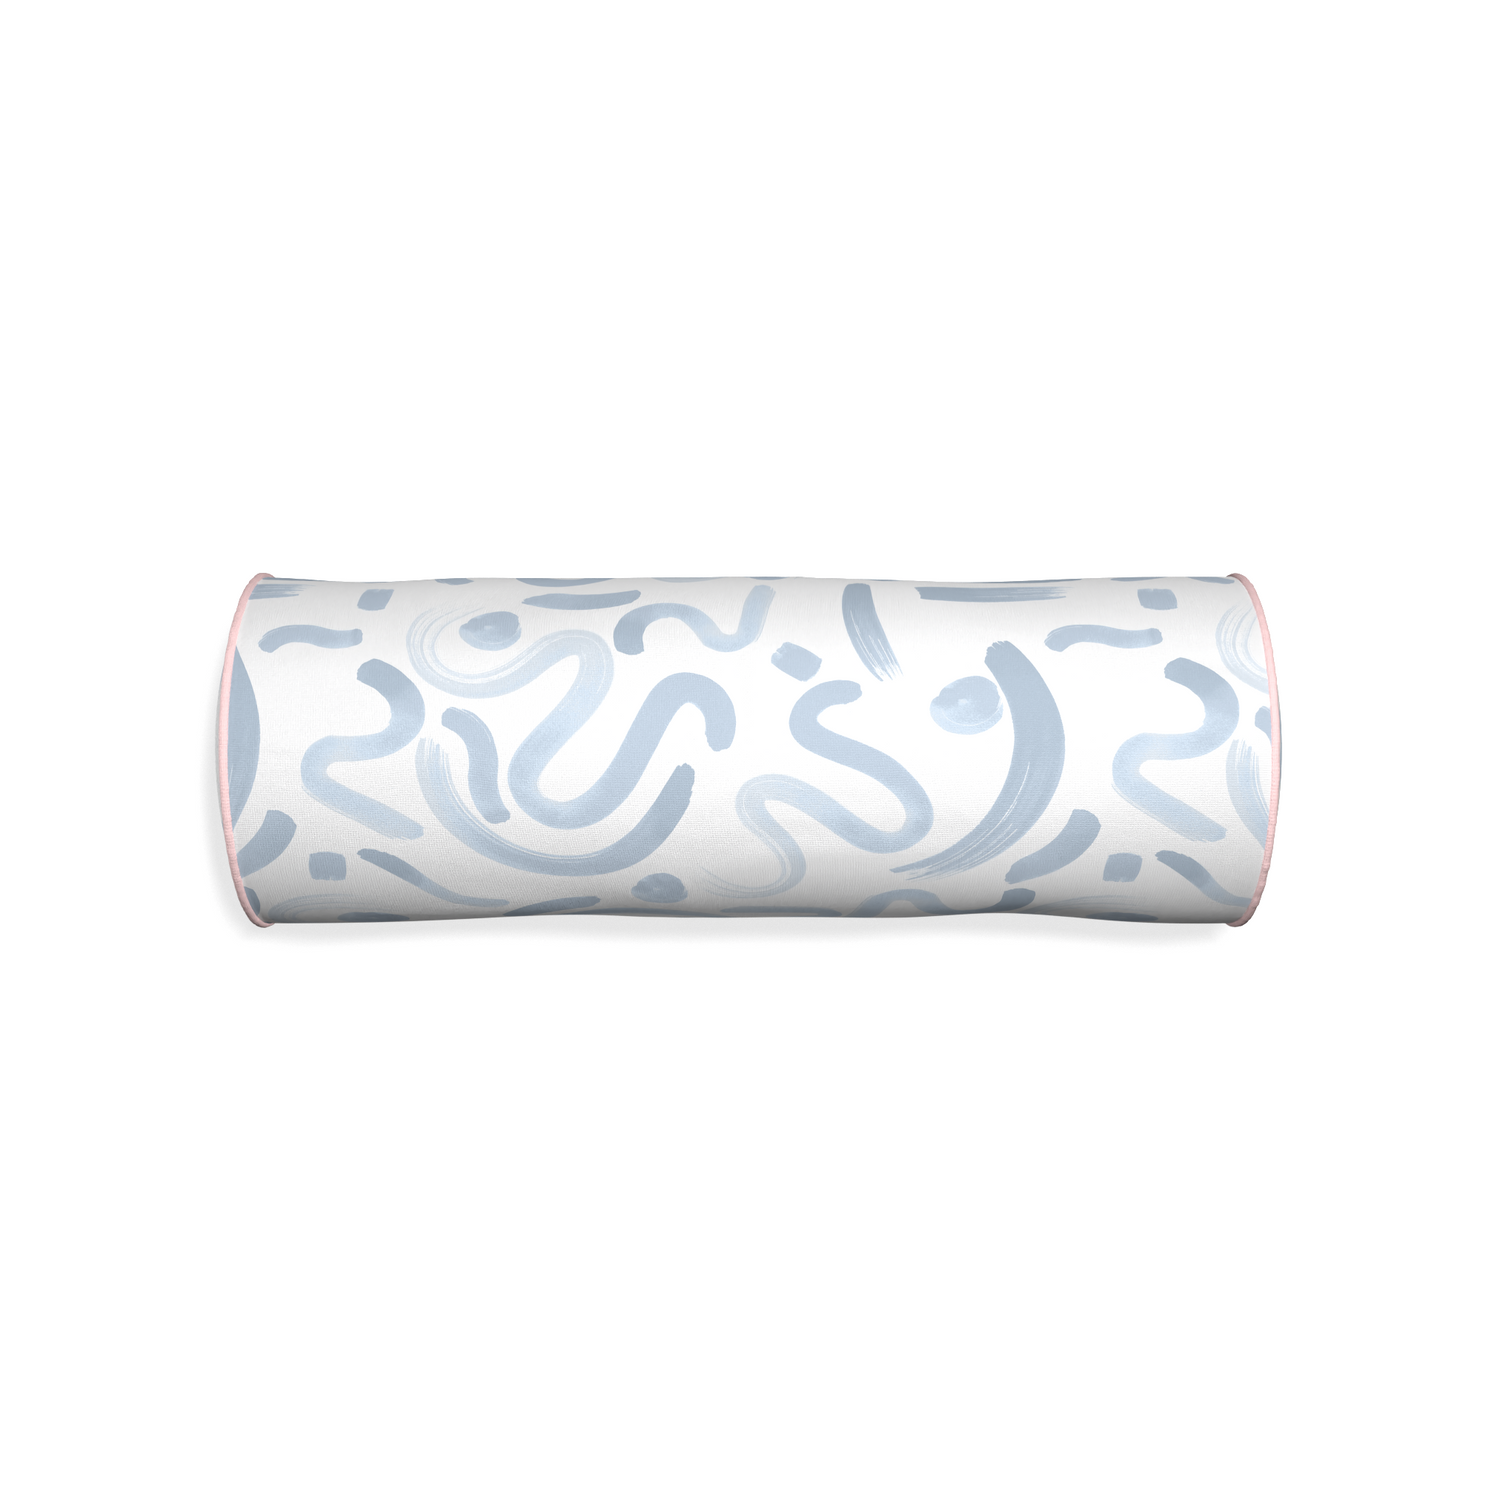 Bolster hockney sky custom abstract sky bluepillow with petal piping on white background